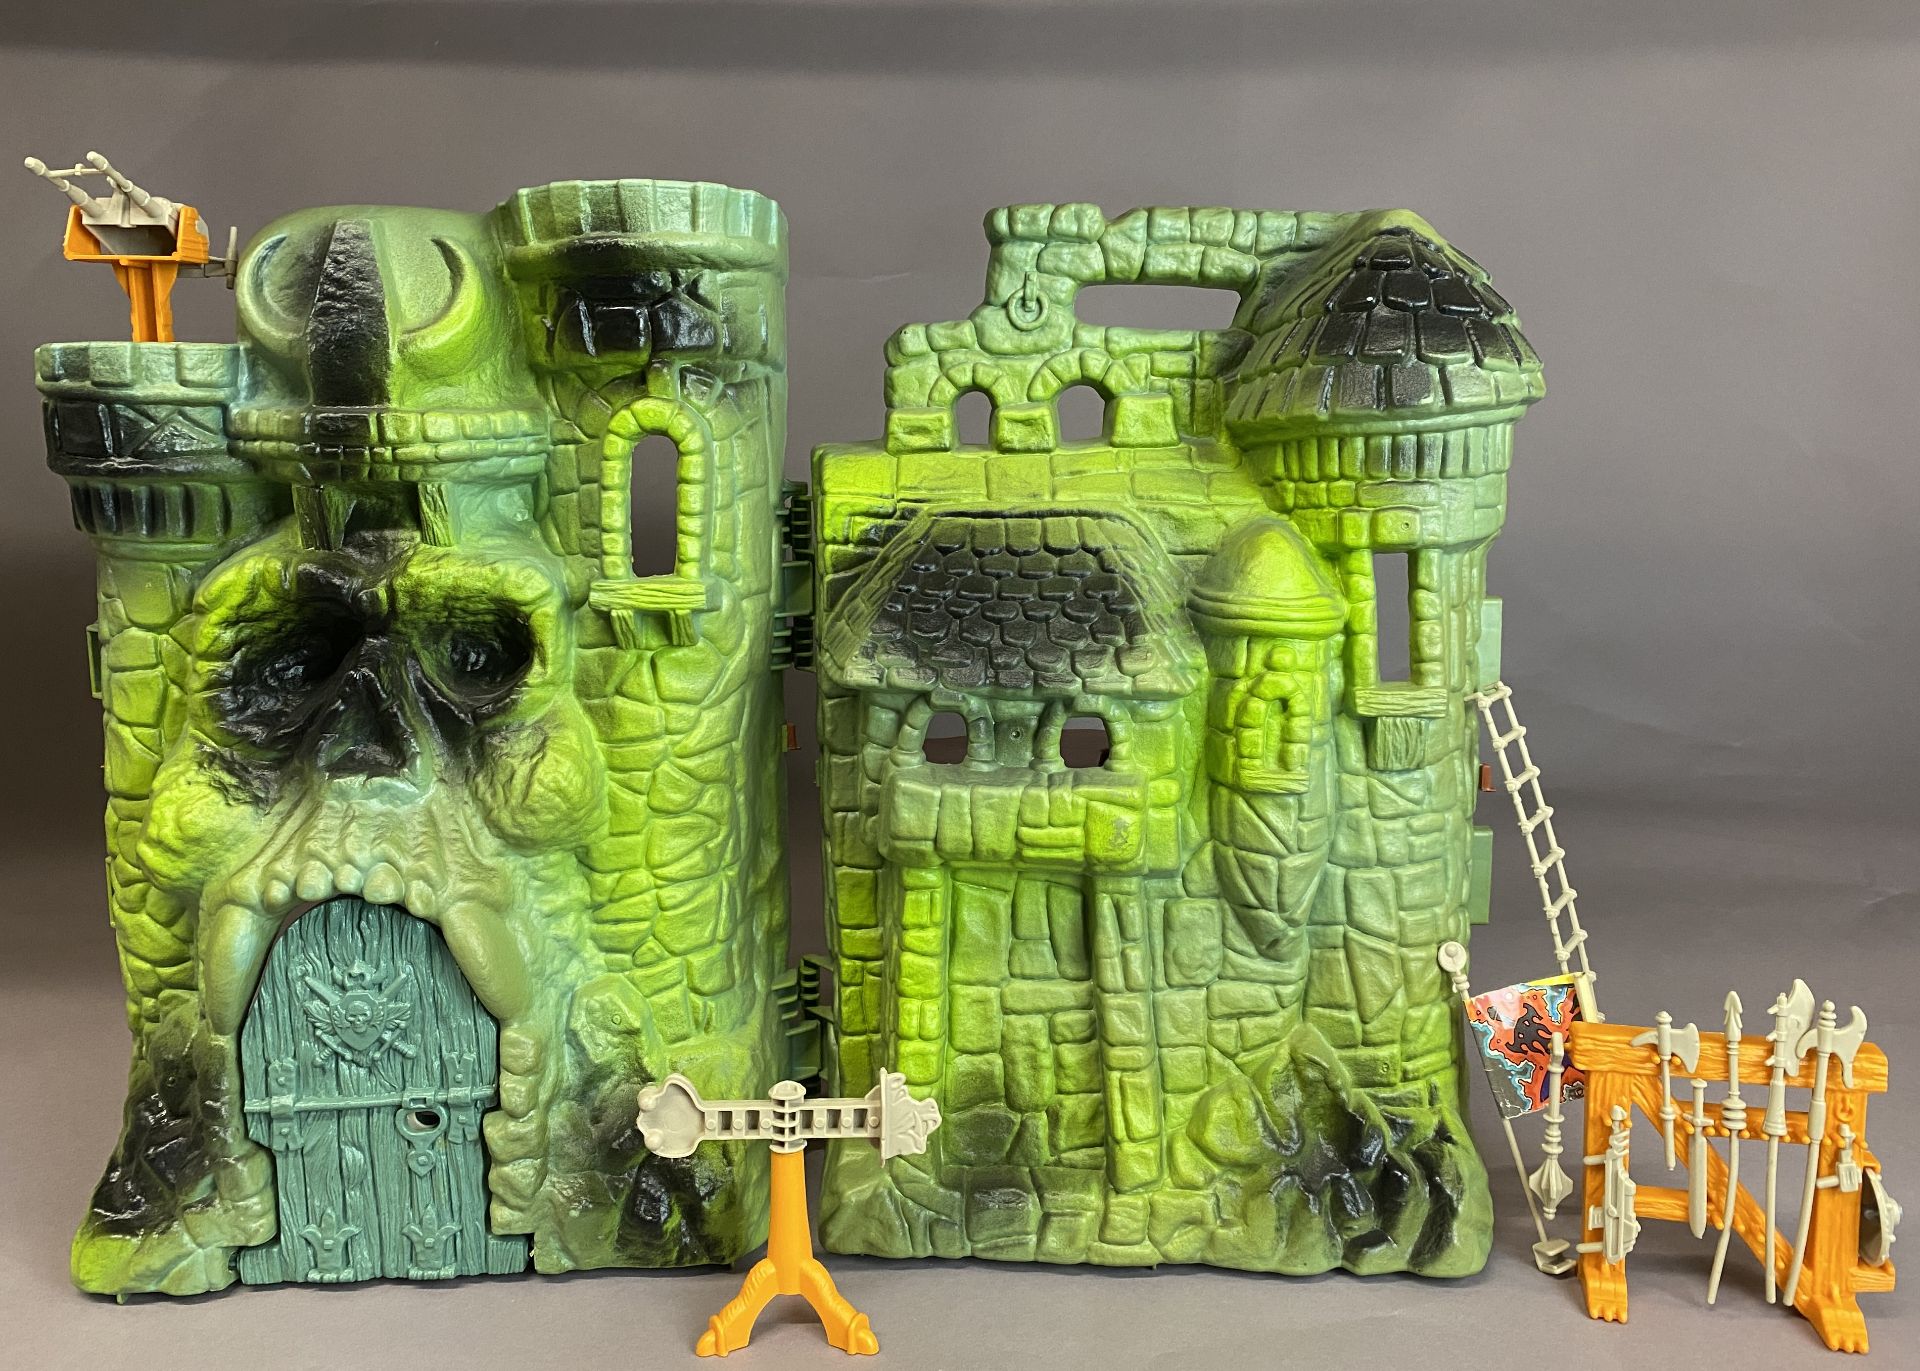 CASTLE GRAYSKULL - Vintage Masters of the Universe Playset (MOTU) - Complete with all accessories